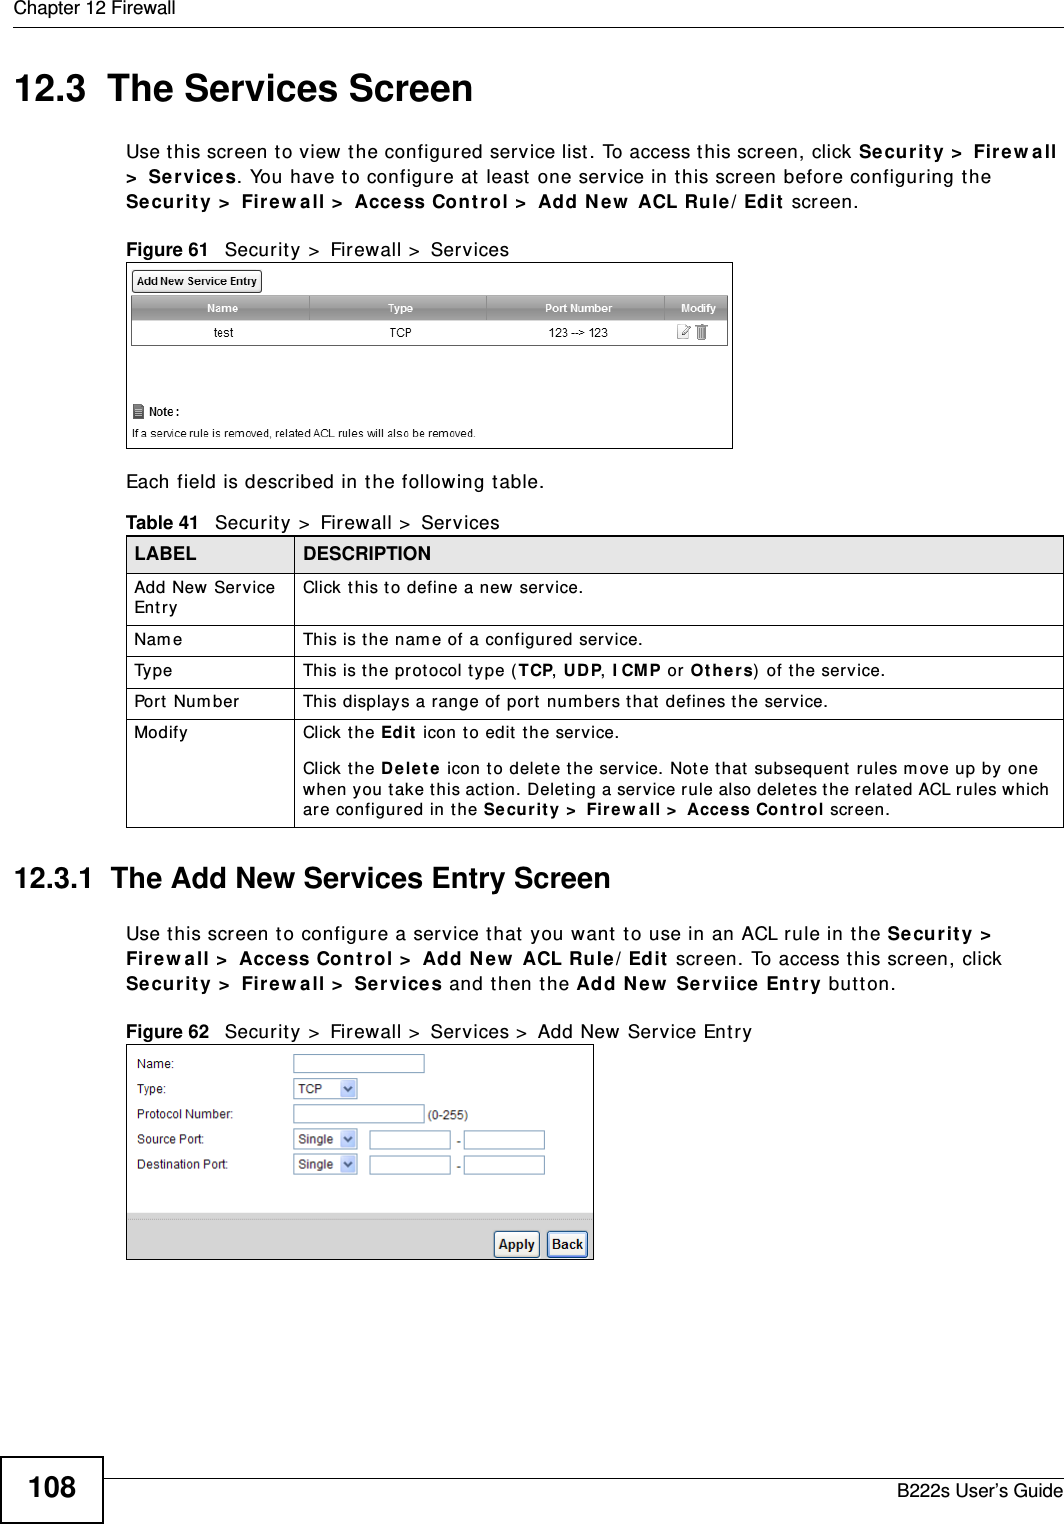 Chapter 12 FirewallB222s User’s Guide10812.3  The Services ScreenUse t his screen t o view the configured service list . To access t his screen, click Securit y &gt;  Fire w all &gt;  Ser vices. You have to configure at  least one ser vice in this screen before configuring t he Security &gt;  Fir e w a ll &gt;  Access Con t rol &gt;  Add N ew  ACL Rule/ Edit  screen.Figure 61   Secur it y &gt;  Firewall &gt;  Ser vicesEach field is described in t he following t able.12.3.1  The Add New Services Entry ScreenUse t his screen t o configure a service t hat  you want  t o use in an ACL rule in t he Secur it y &gt;  Fir e w a ll &gt;  Access Con t rol &gt;  Add N e w  ACL Rule/ Edit  screen. To access t his screen, click Security &gt;  Fir e w a ll &gt;  Ser vices and t hen t he Add New  Serviice Ent r y but t on.Figure 62   Secur it y &gt;  Firewall &gt;  Services &gt;  Add New Service EntryTable 41   Security &gt;  Firewall &gt;  ServicesLABEL DESCRIPTIONAdd New  Service Ent ryClick t his t o define a new service.Nam e This is t he nam e of a configured service.Ty p e This is t he prot ocol t ype ( TCP, UD P, I CMP or Ot h e rs) of t he service.Por t  Num ber This displays a range of port num bers t hat  defines t he service.Modify Click the Ed it  icon t o edit  t he ser vice.Click t he D e le t e icon to delet e the ser vice. Not e t hat  subsequent  rules m ov e up by one when you take t his action. Delet ing a serv ice rule also deletes t he relat ed ACL rules which are configured in t he Secur it y  &gt;  Fire w all &gt;  Acce ss Cont r ol screen.